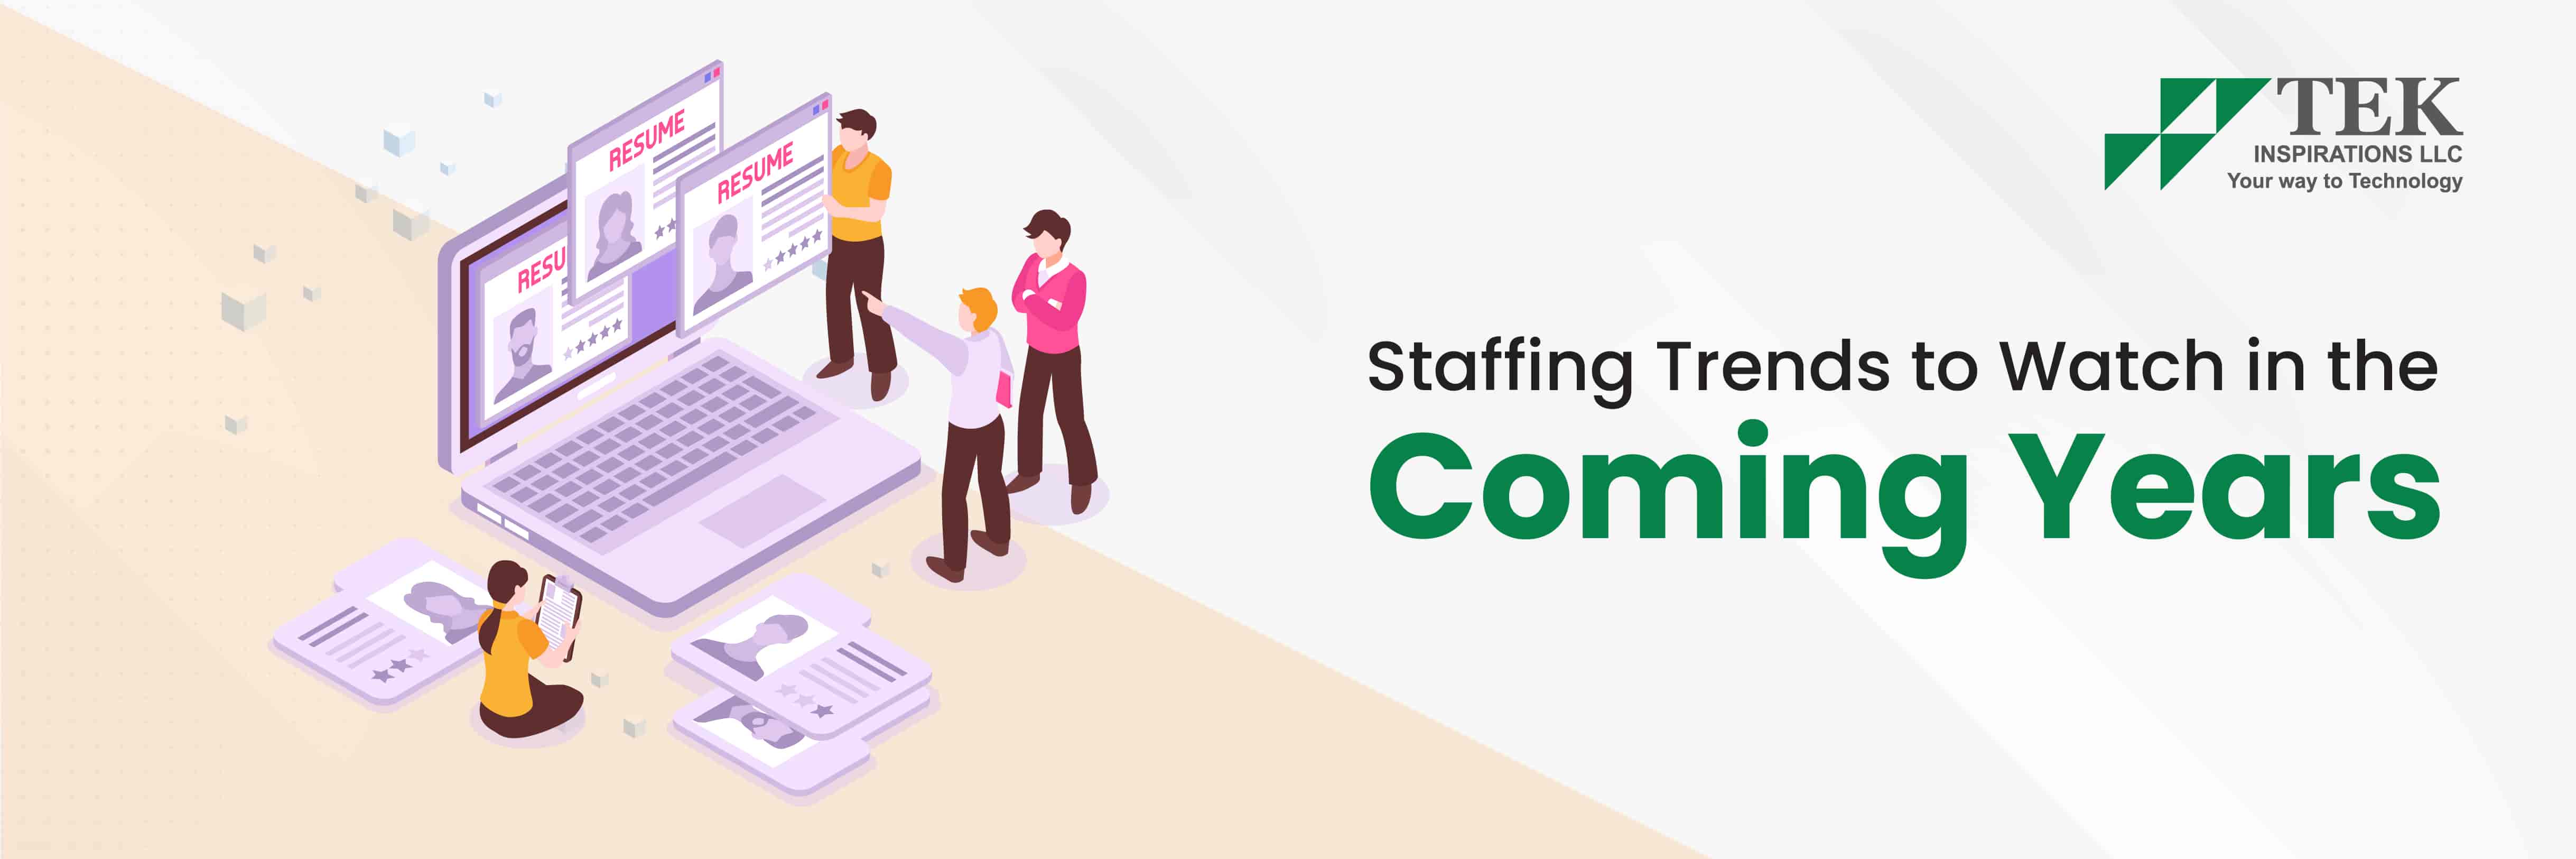 Staffing Trends To Watch In The Coming Years